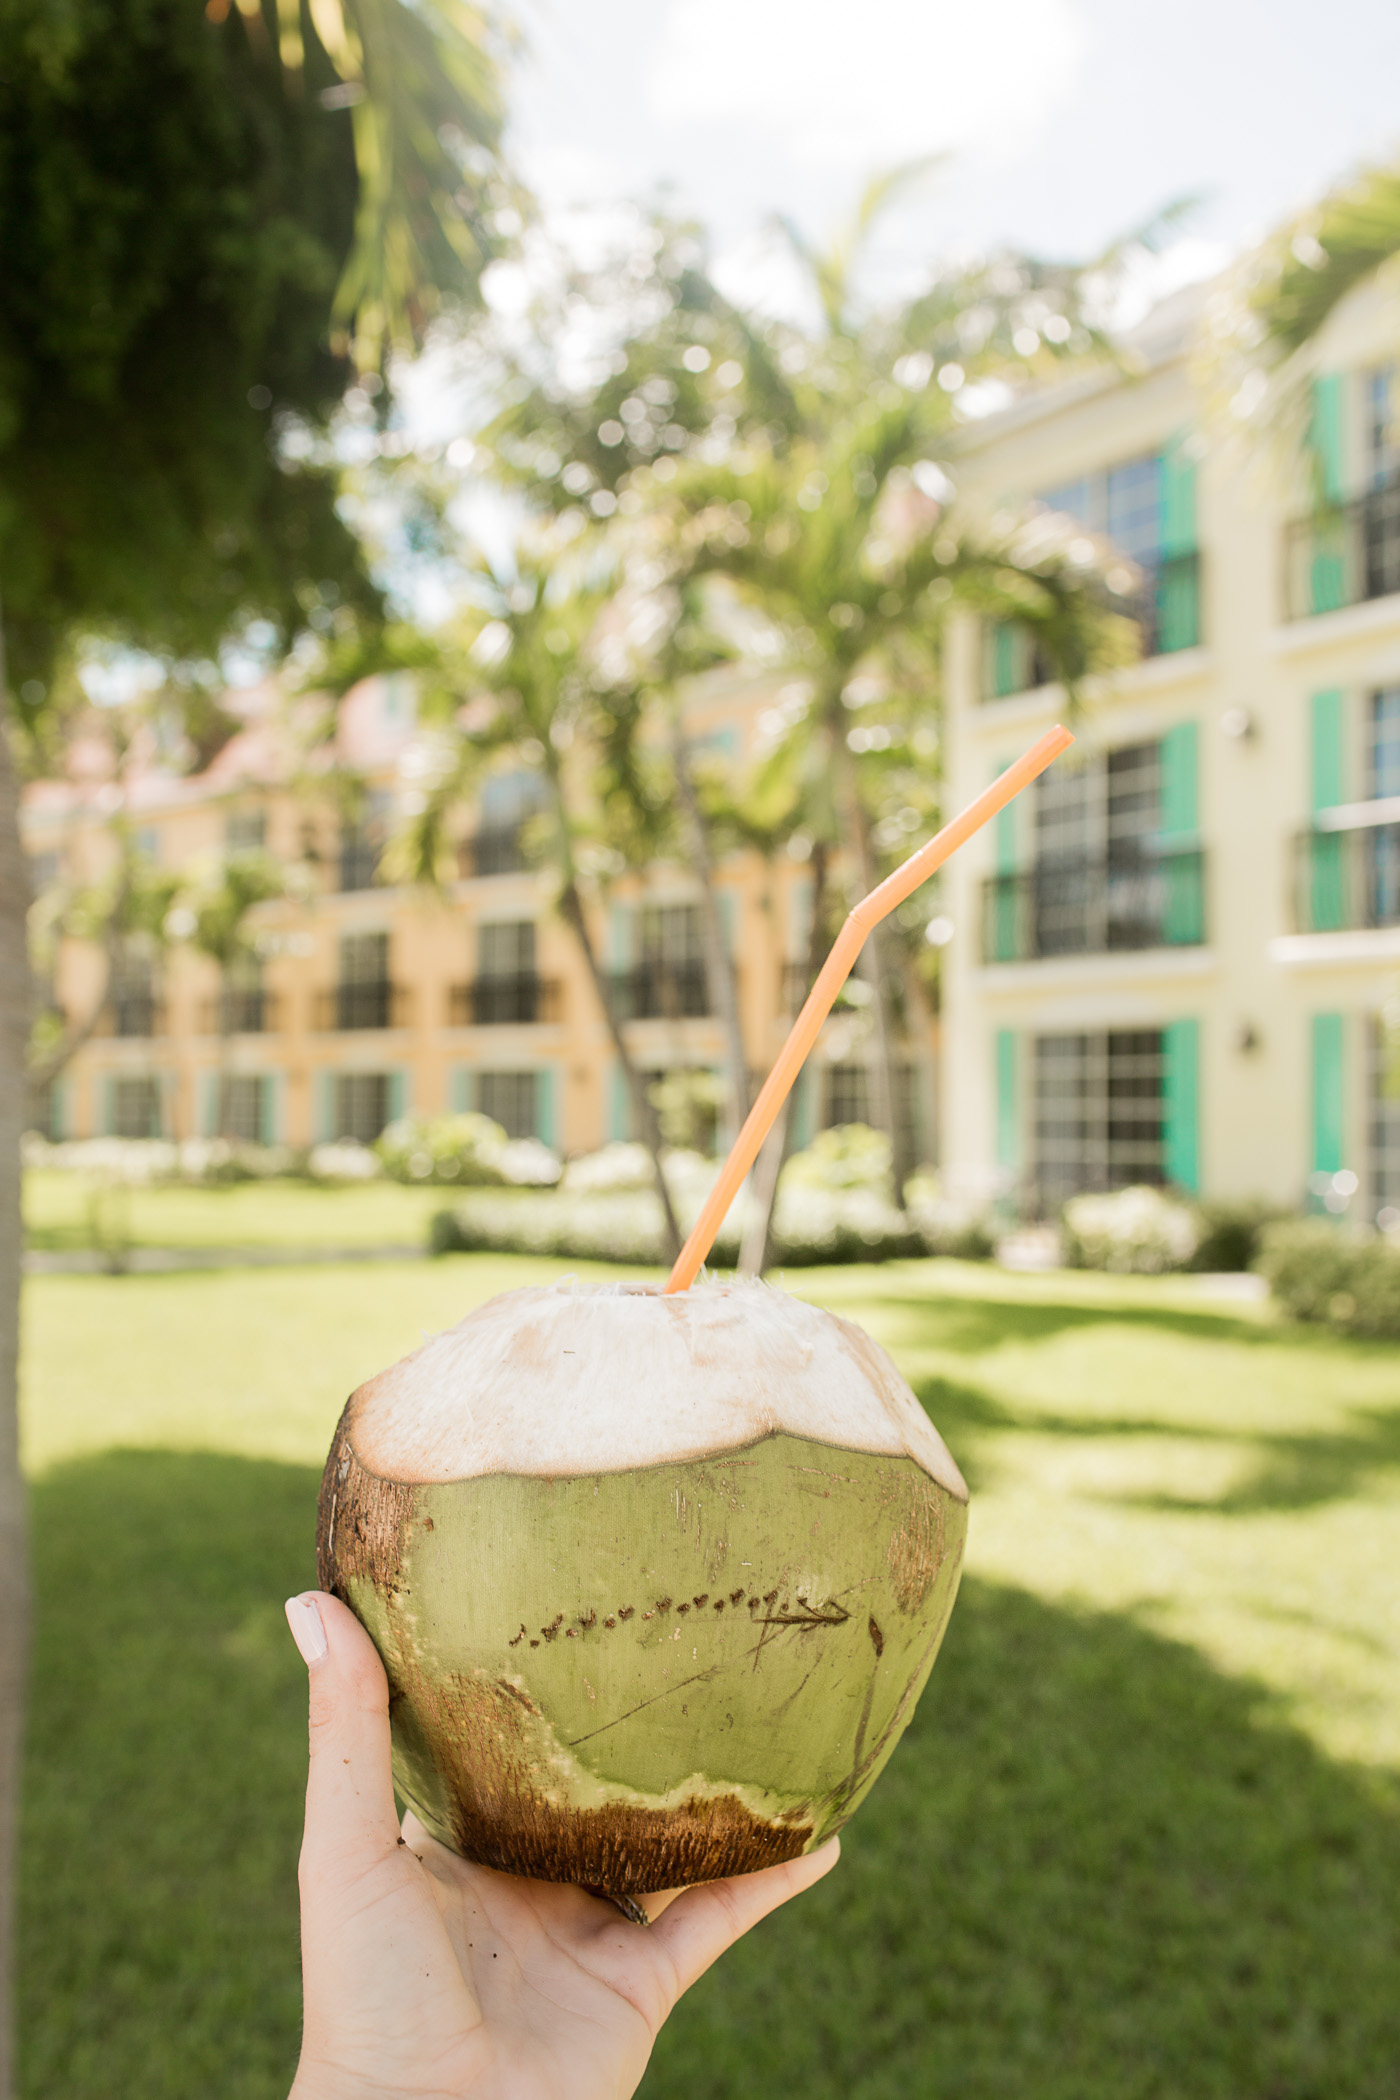 Enjoy a fresh young coconut in Turks and Caicos